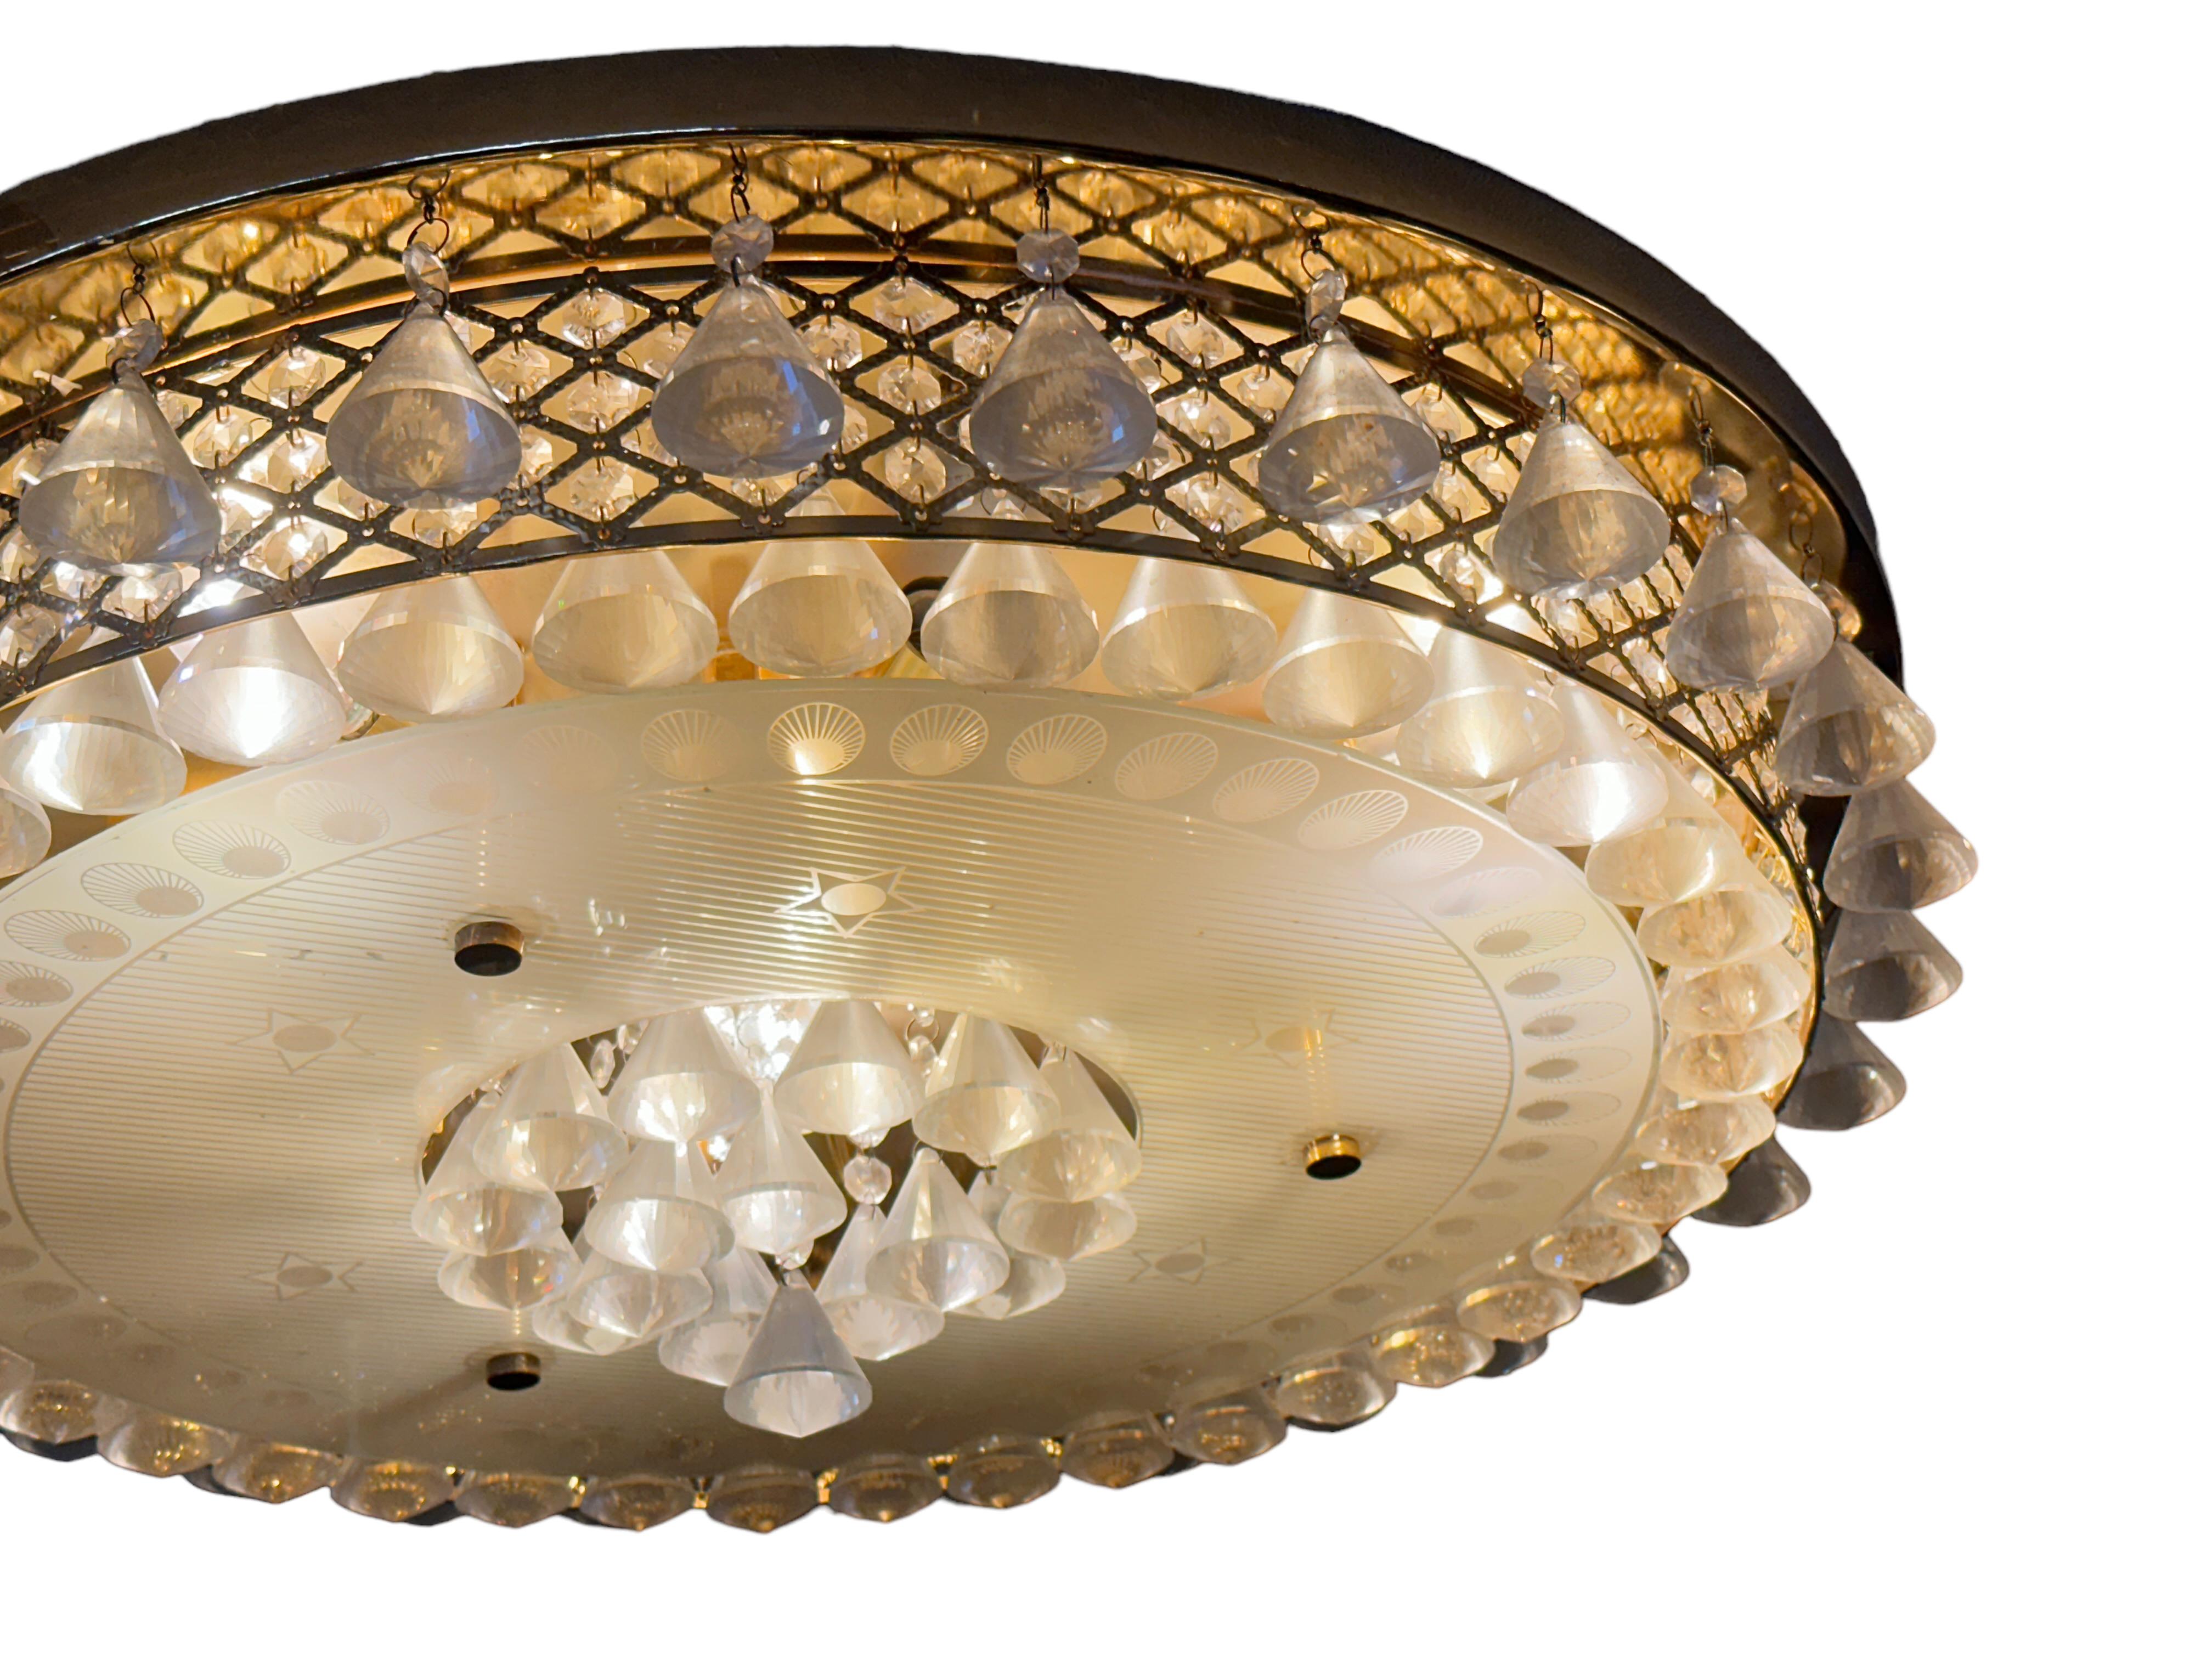 Stunning Large Gilt Brass Crystal Flush Mount Chandelier by Palwa Germany 1980s For Sale 4